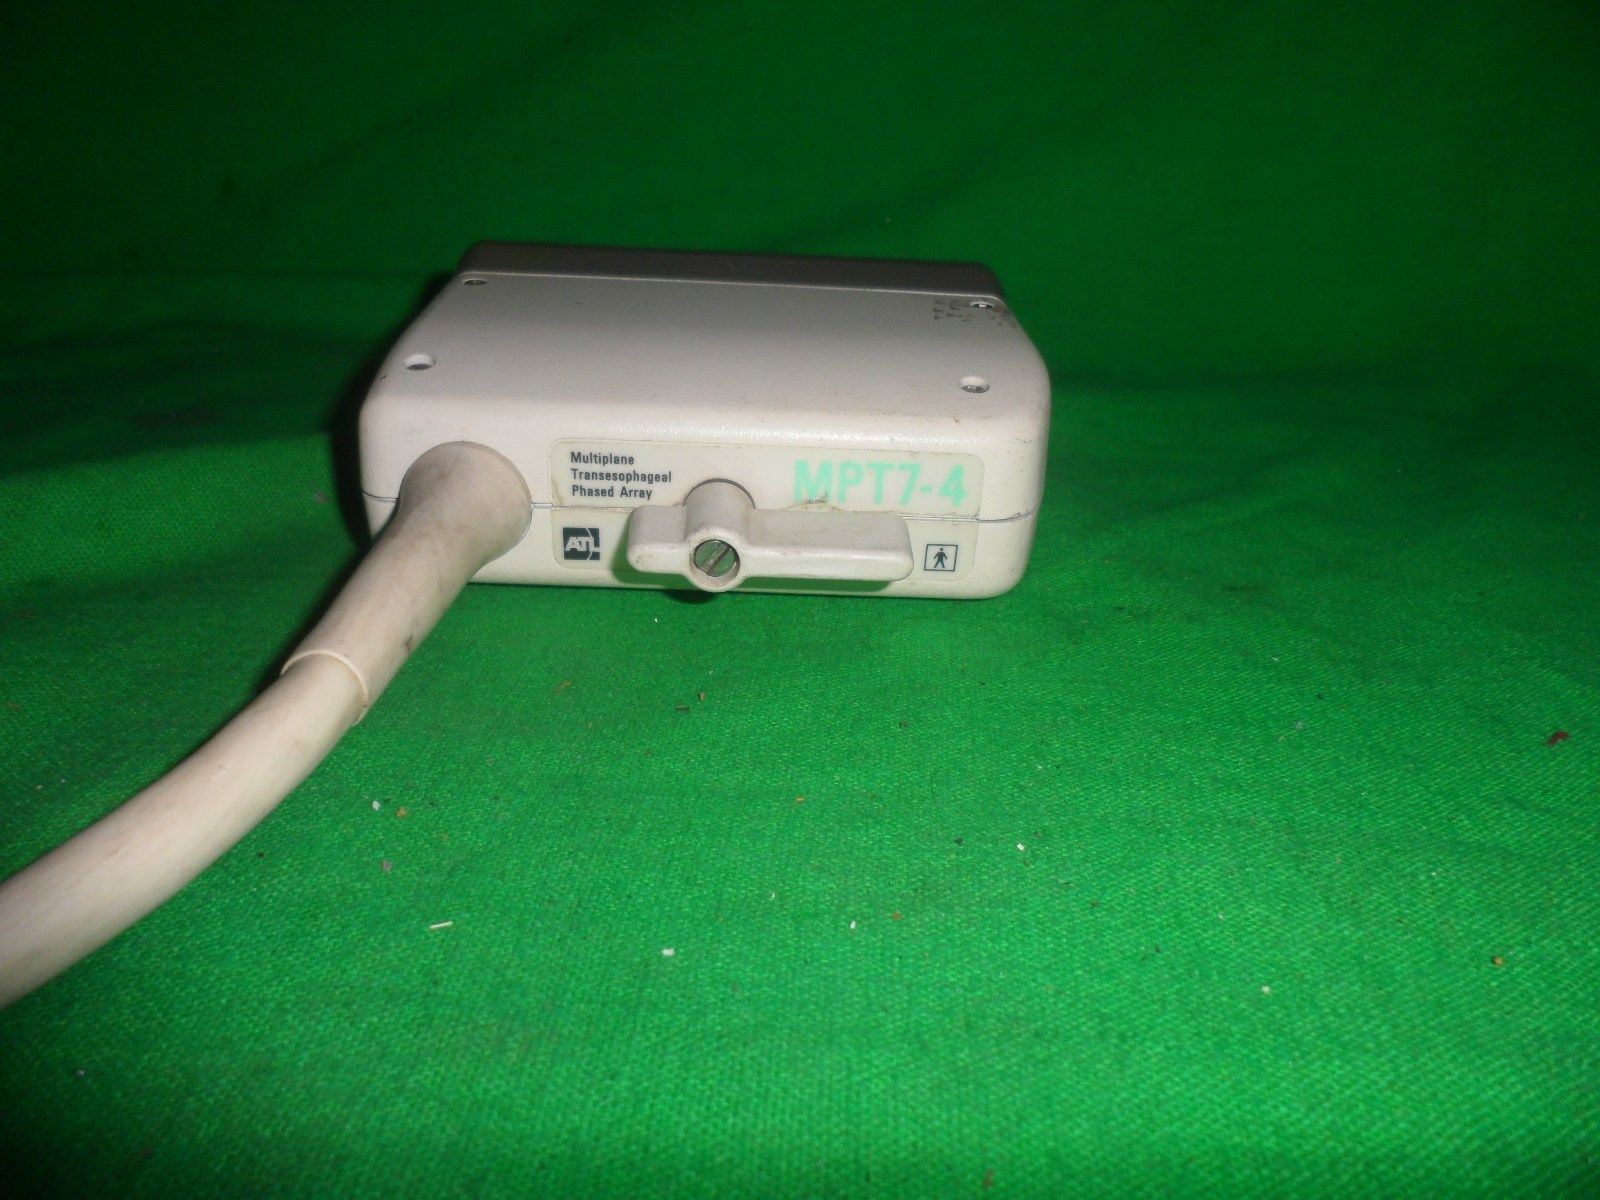 Philips ATL MPT7-4  Multiplane Transesophageal Phased Array Tee Transducer Probe DIAGNOSTIC ULTRASOUND MACHINES FOR SALE